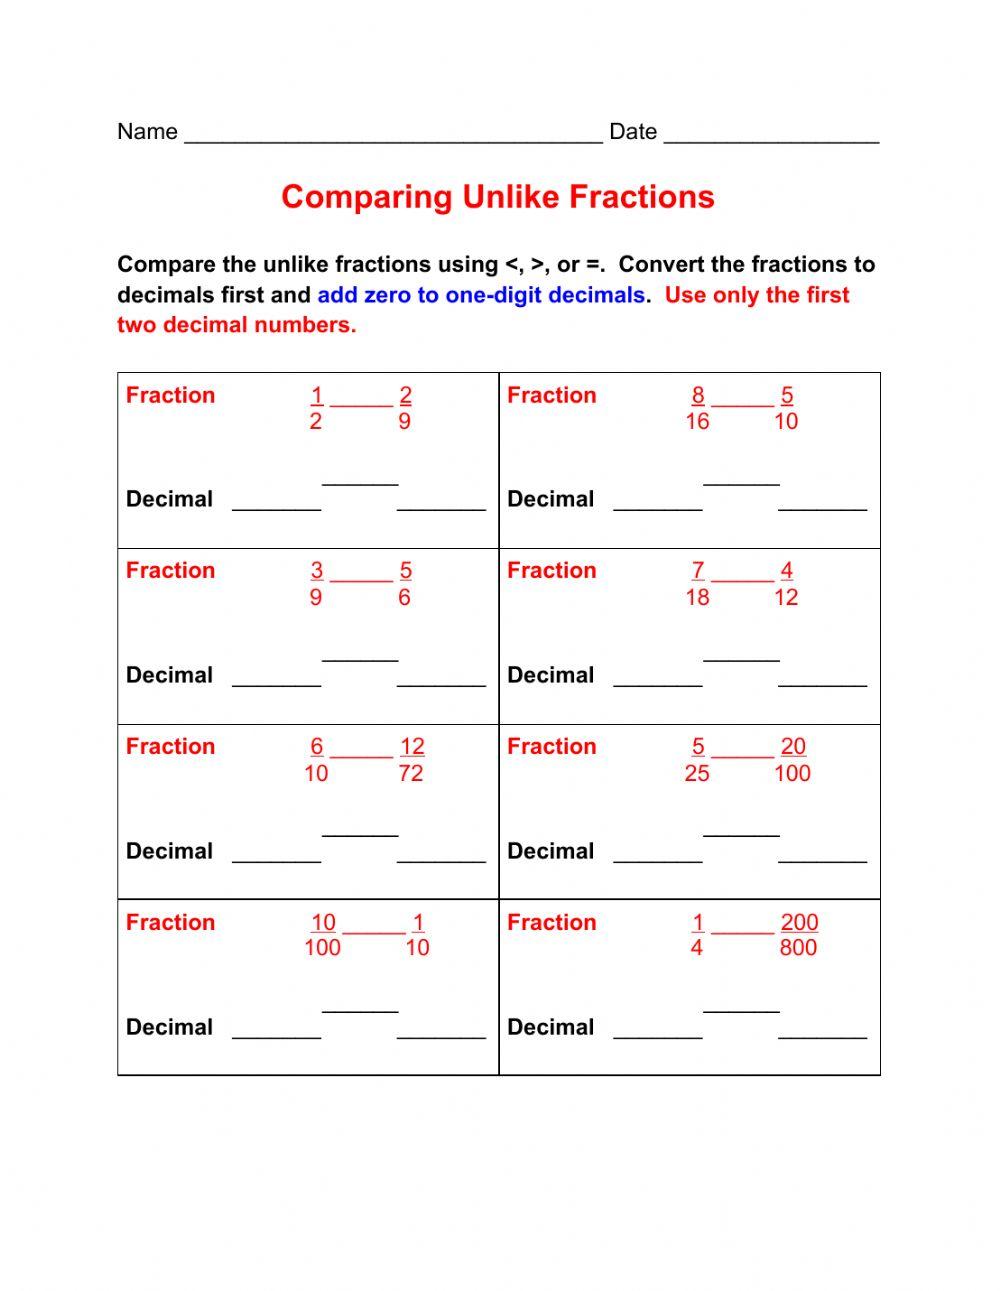 Comparing Unlike Fractions by Converting to Decimals